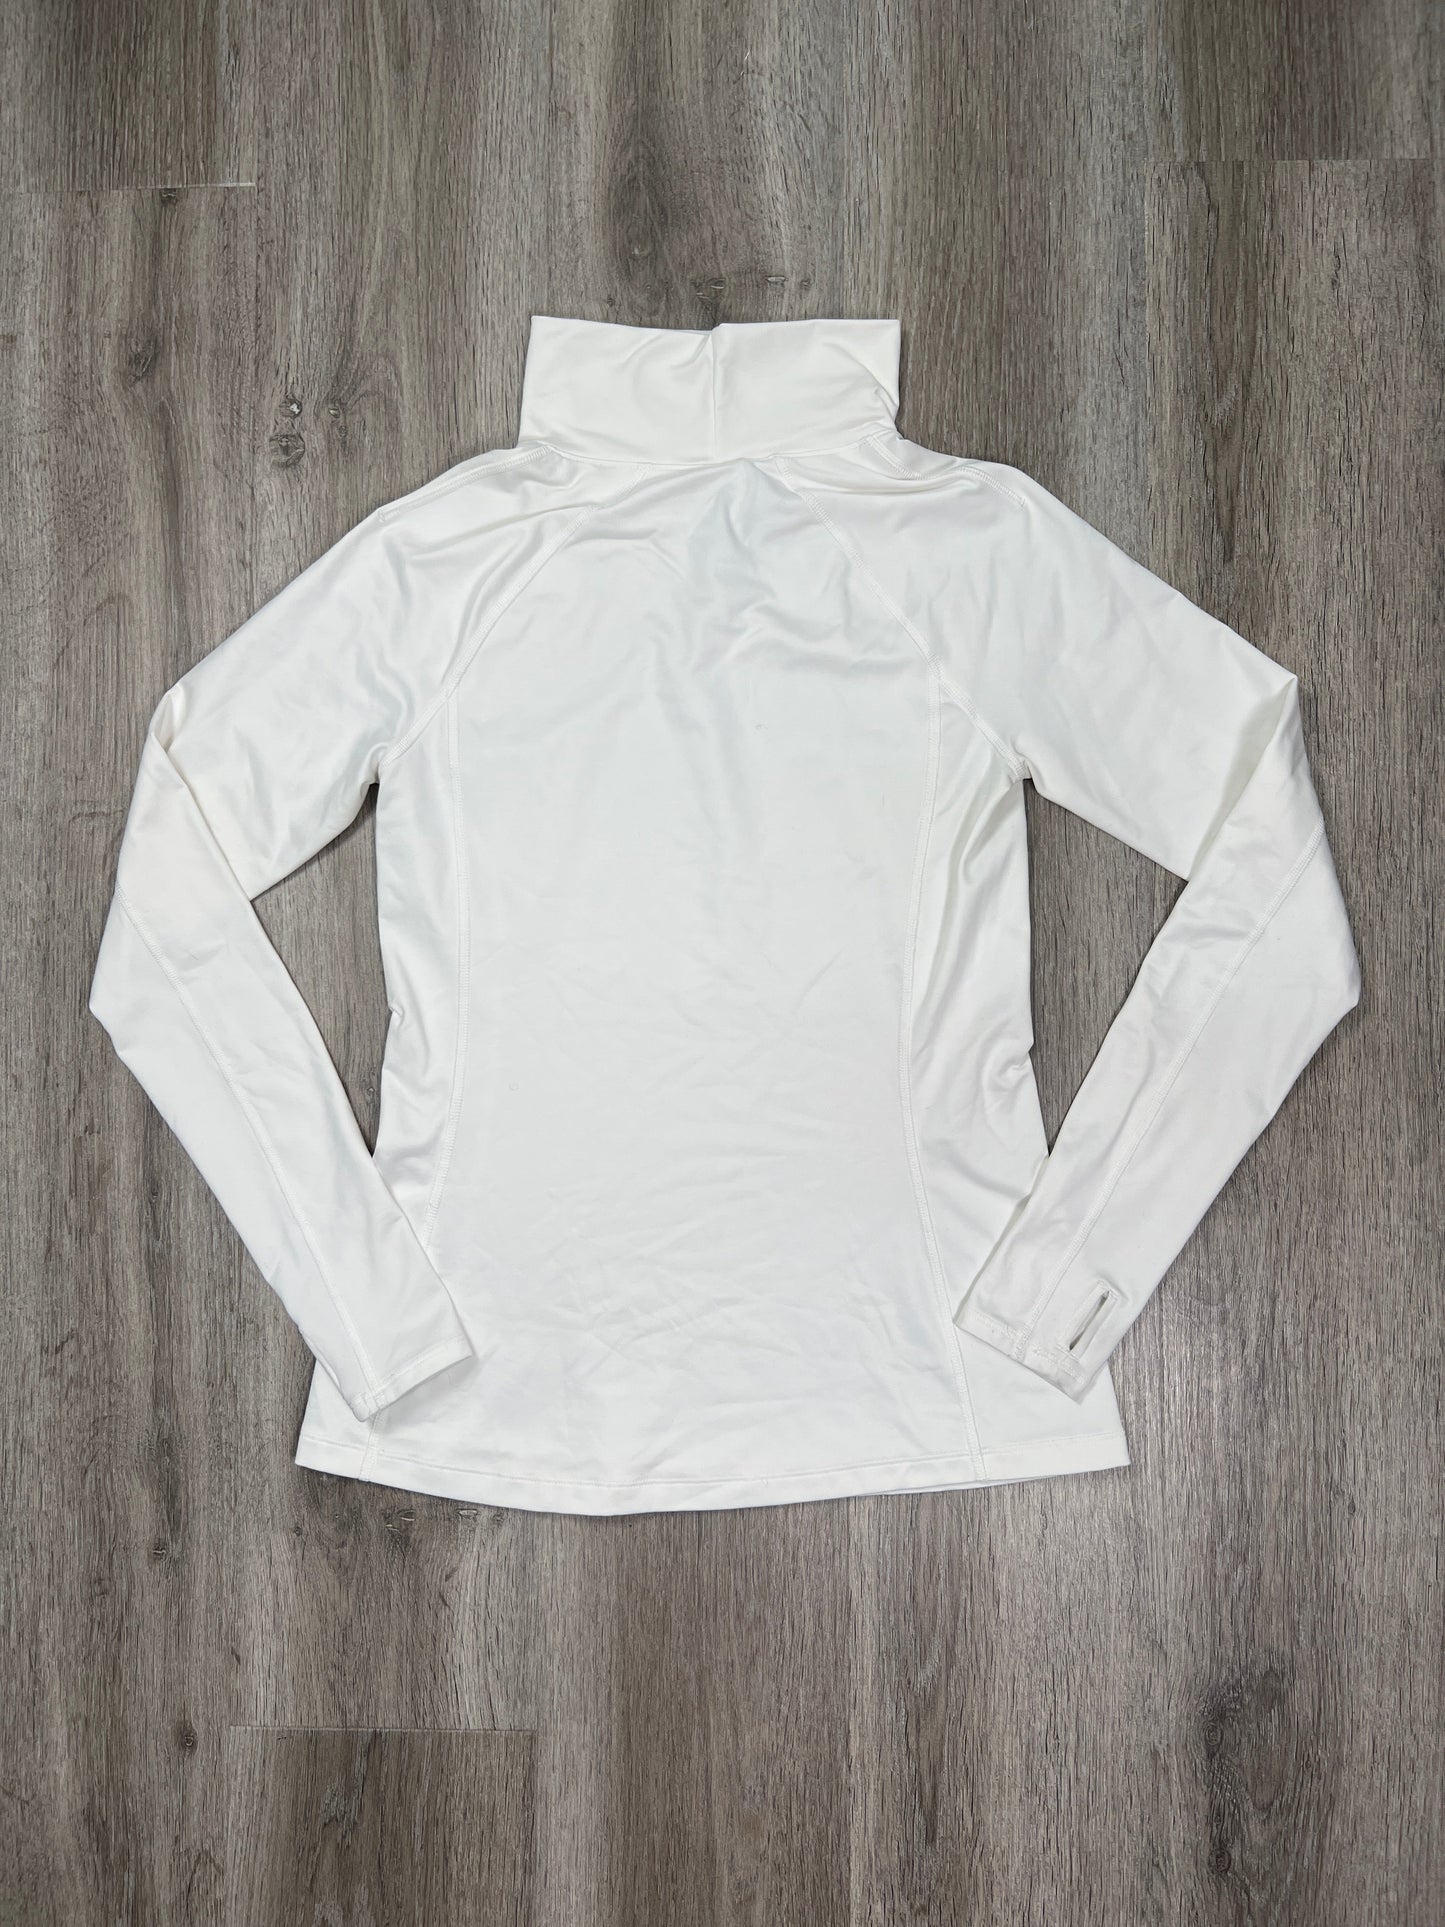 White Athletic Top Long Sleeve Collar Under Armour, Size S